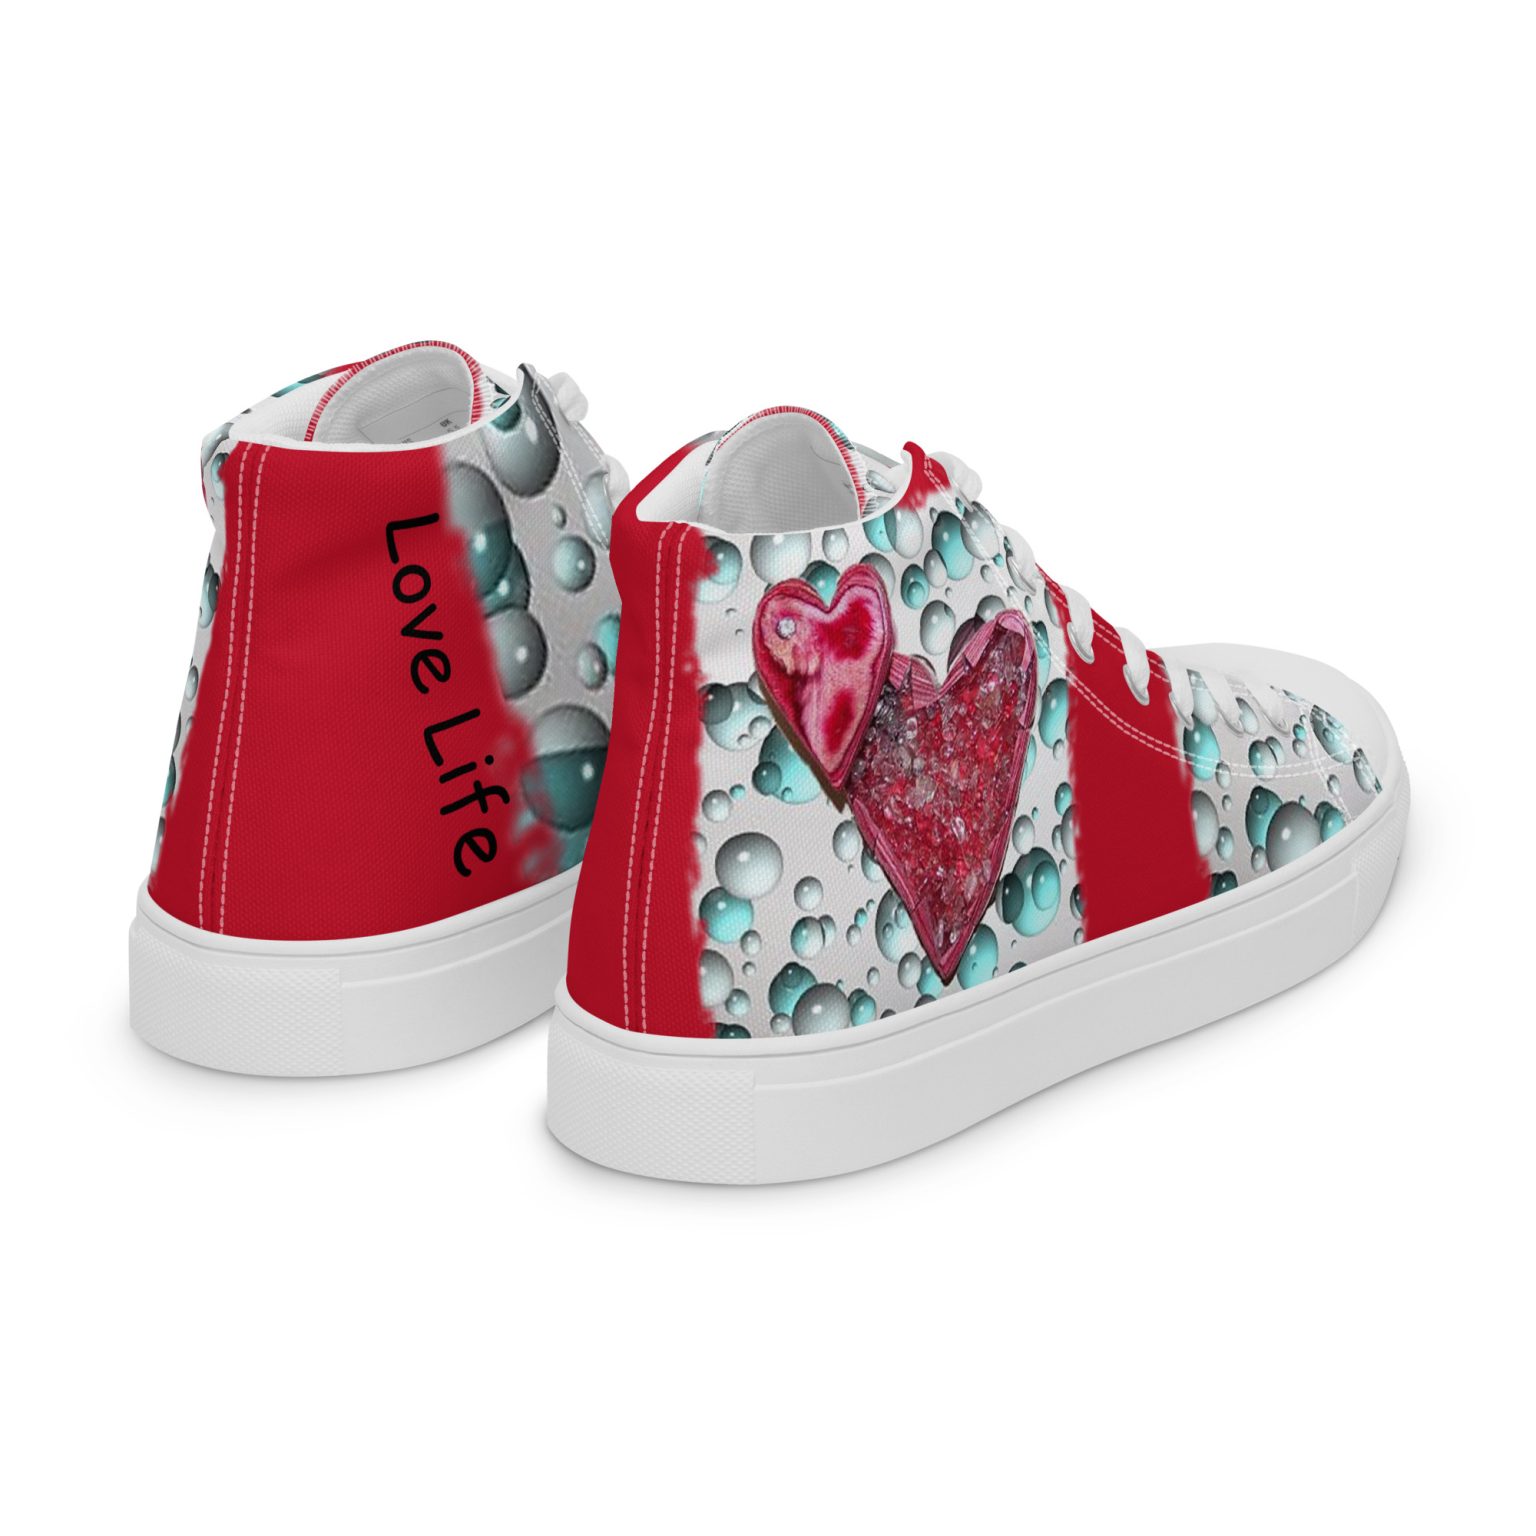 Two Red Hearts with Bubbles art Love Life Shoes always be Pro-Life I Love Life Shoes